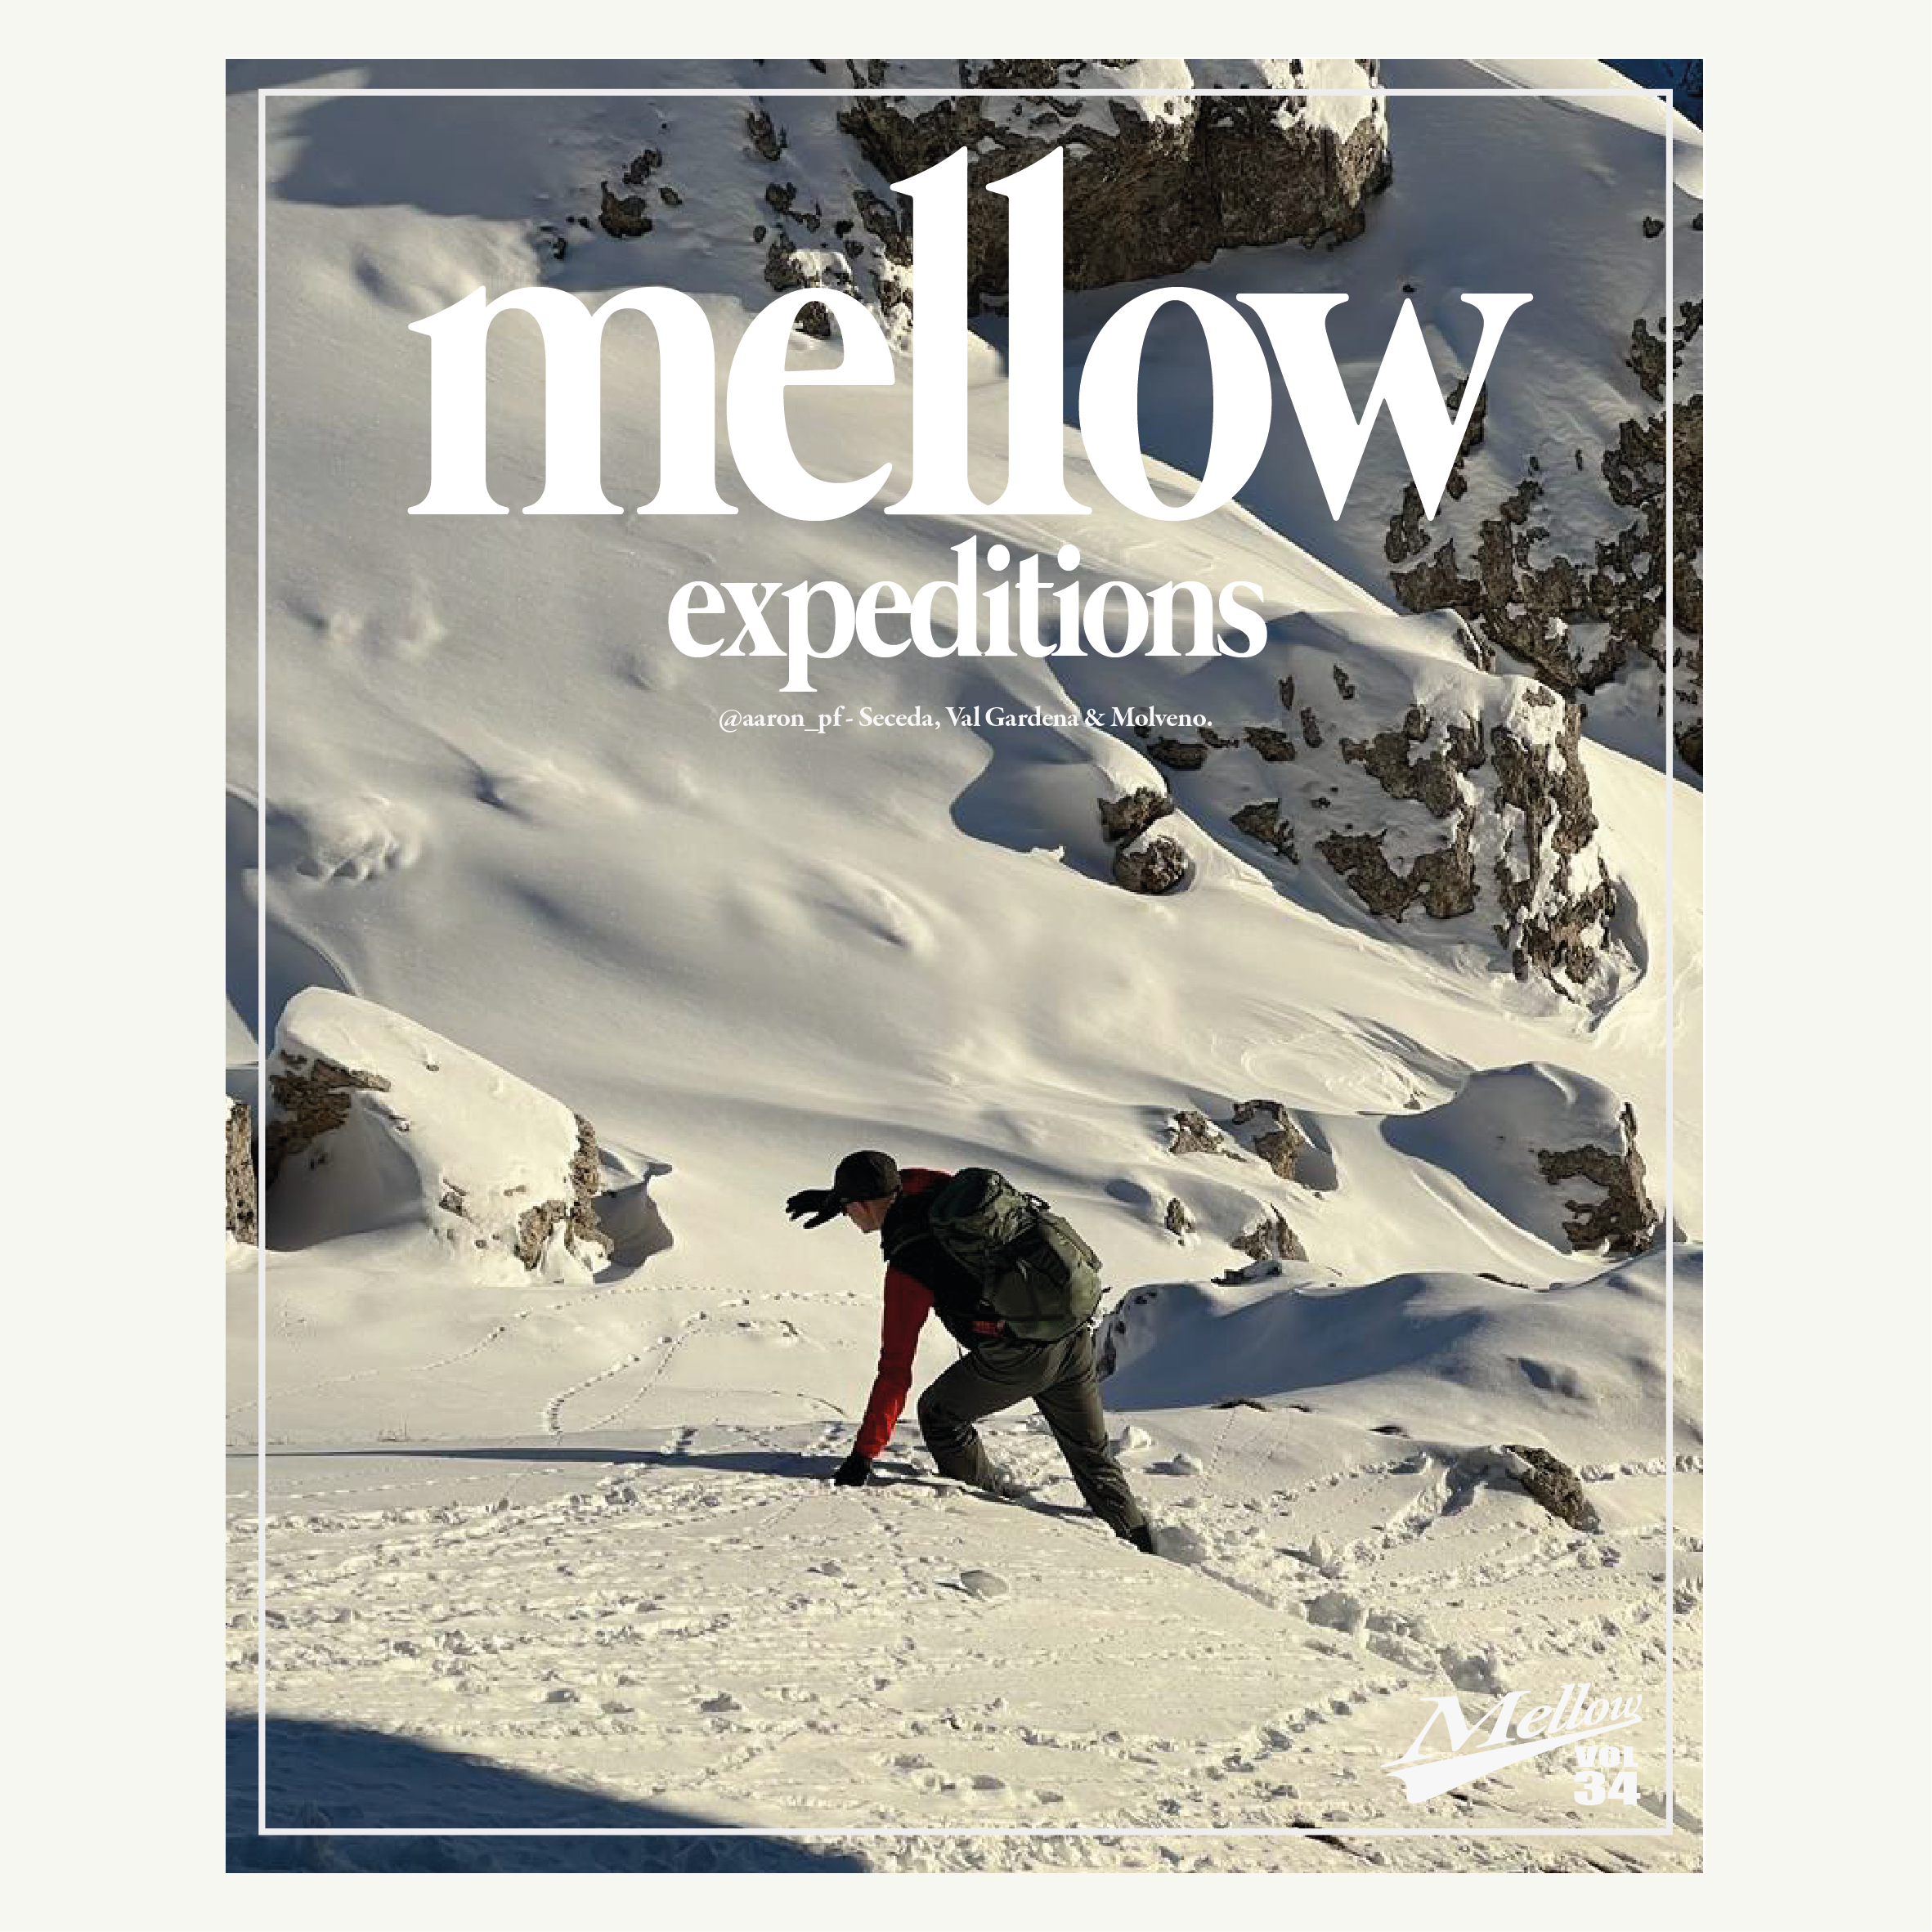 Mellow Expeditions - @aaron_pf